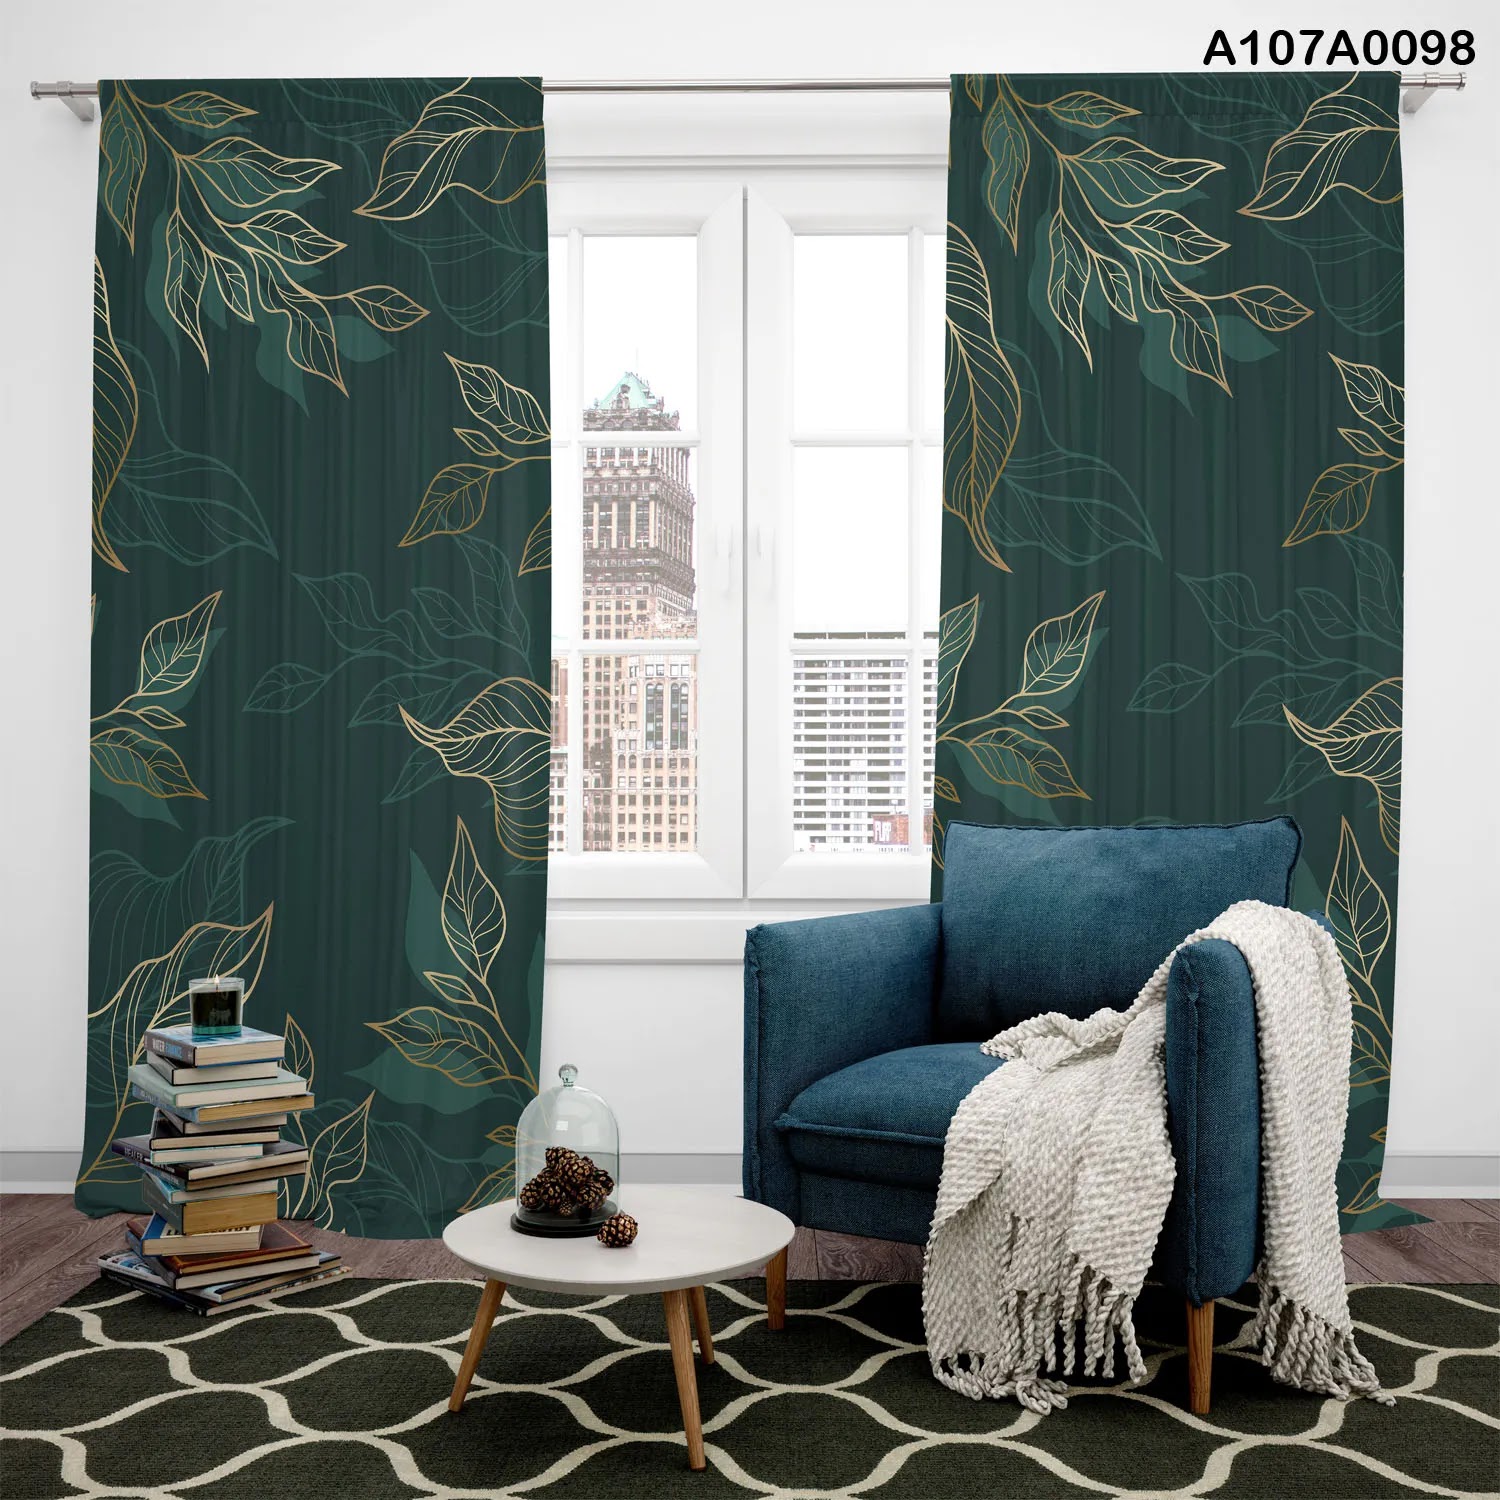 Curtains in dark green color with gold leaves